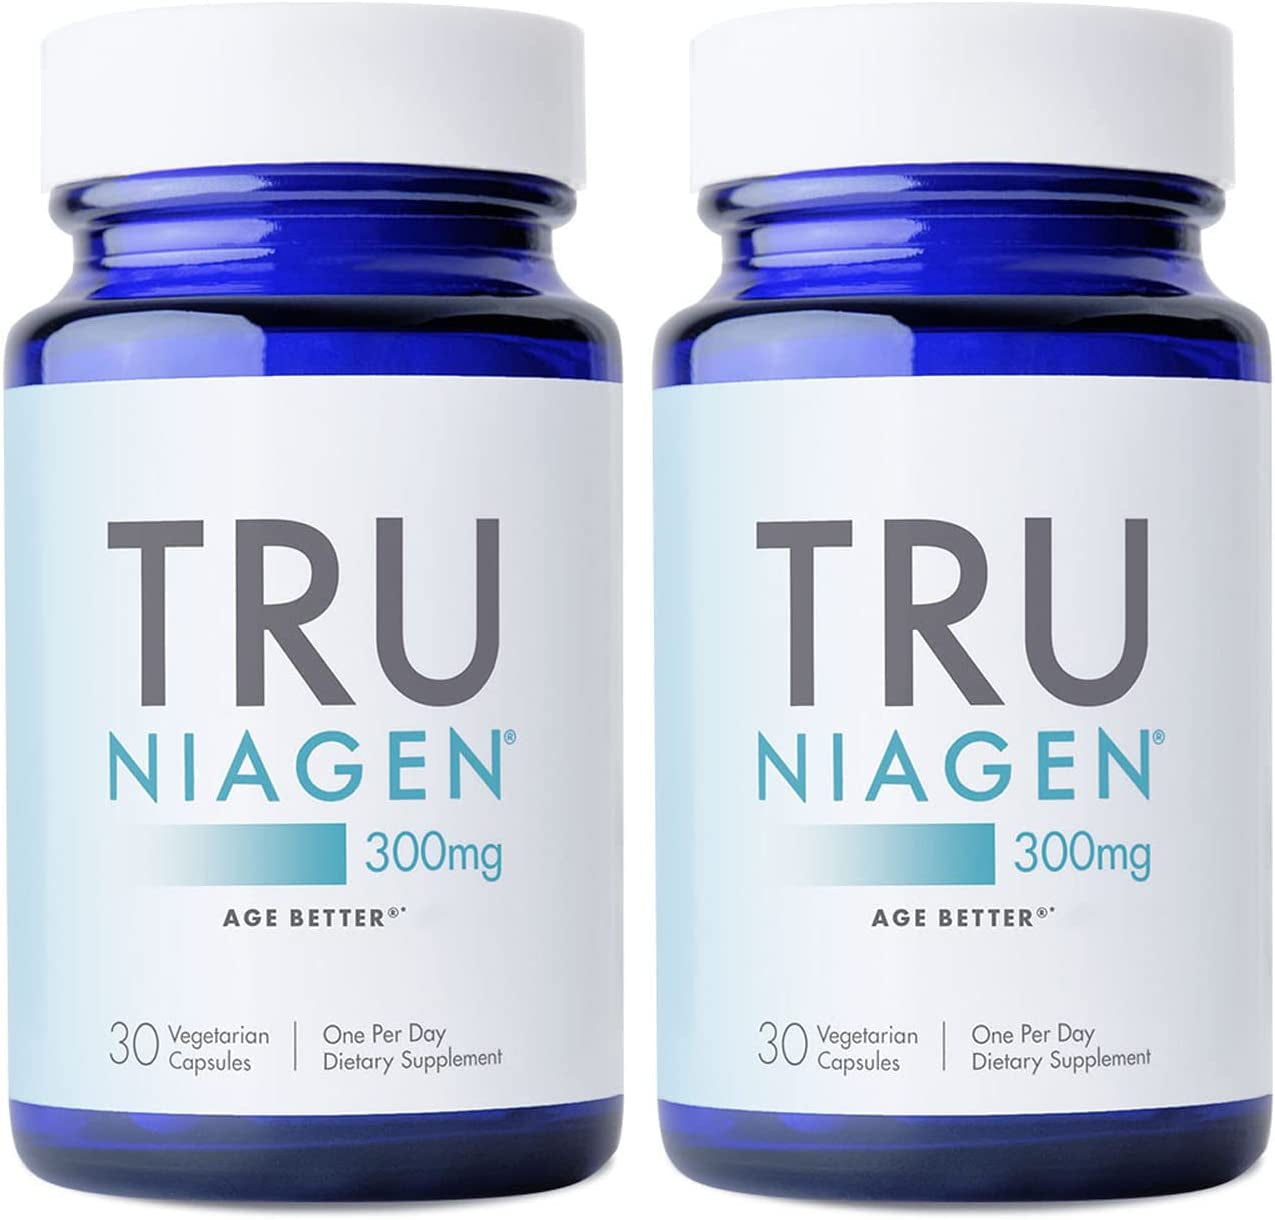 Multi Award Winning Patented NAD+ Booster Supplement Most Efficient - Nicotinamide Riboside for Cellular Energy Metabolism & Repair-Healthy Aging -300Mg (30,60 & 90 Servings)